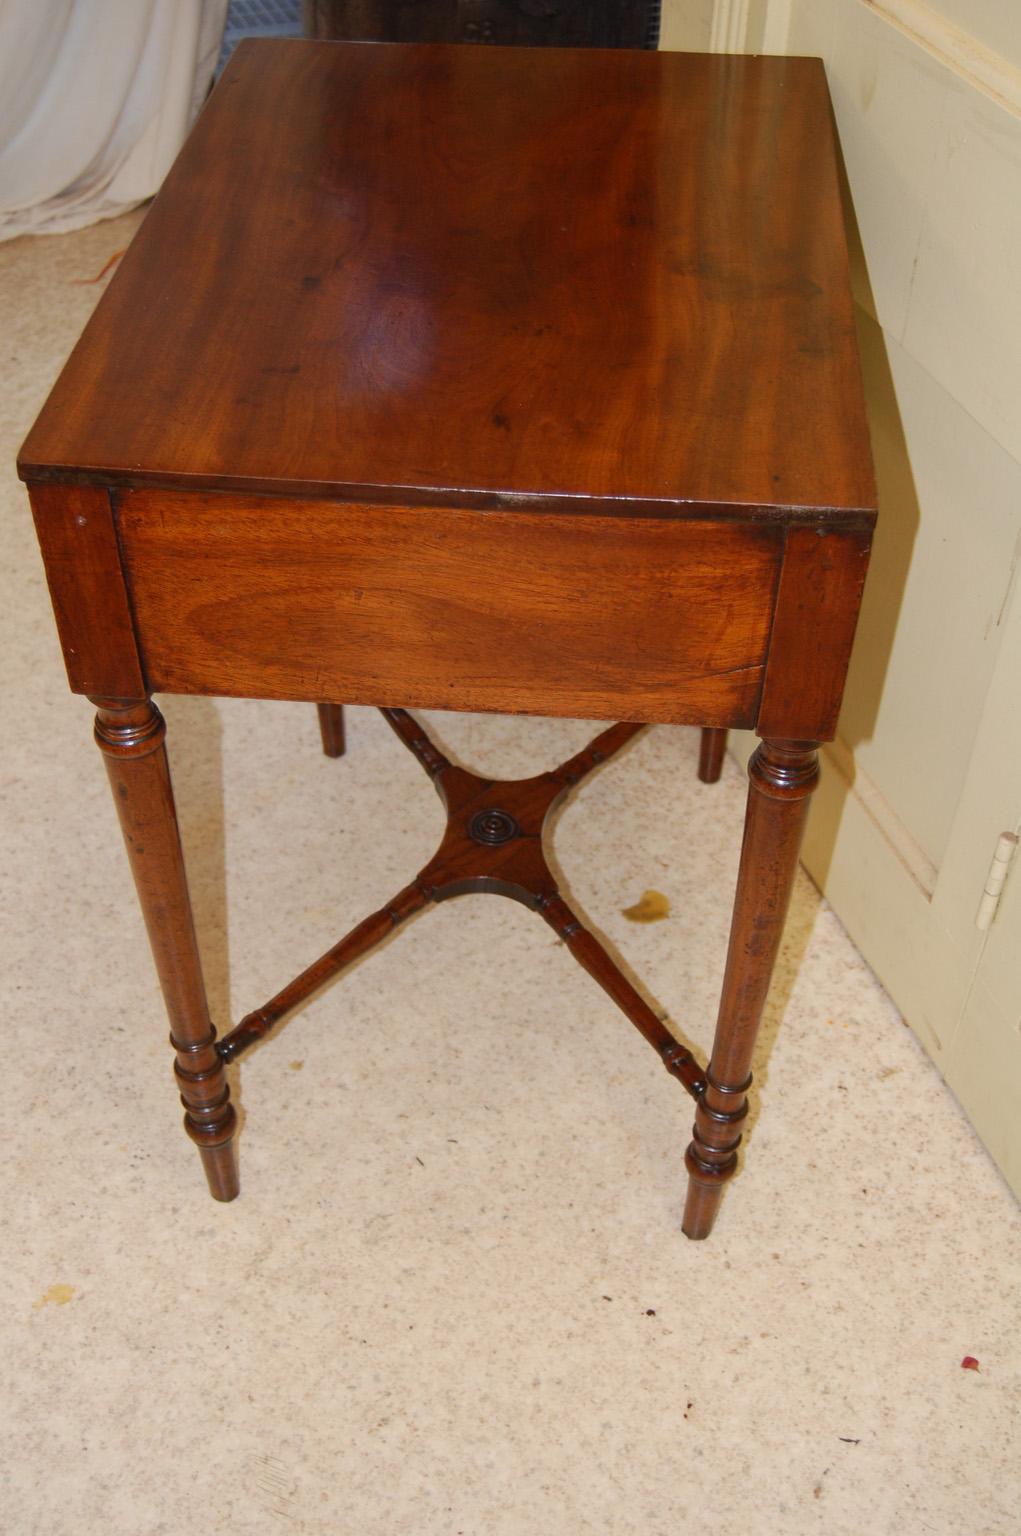 Late 18th Century English Georgian Sheraton Mahogany Side Table with Cross Stretcher, Two Drawers